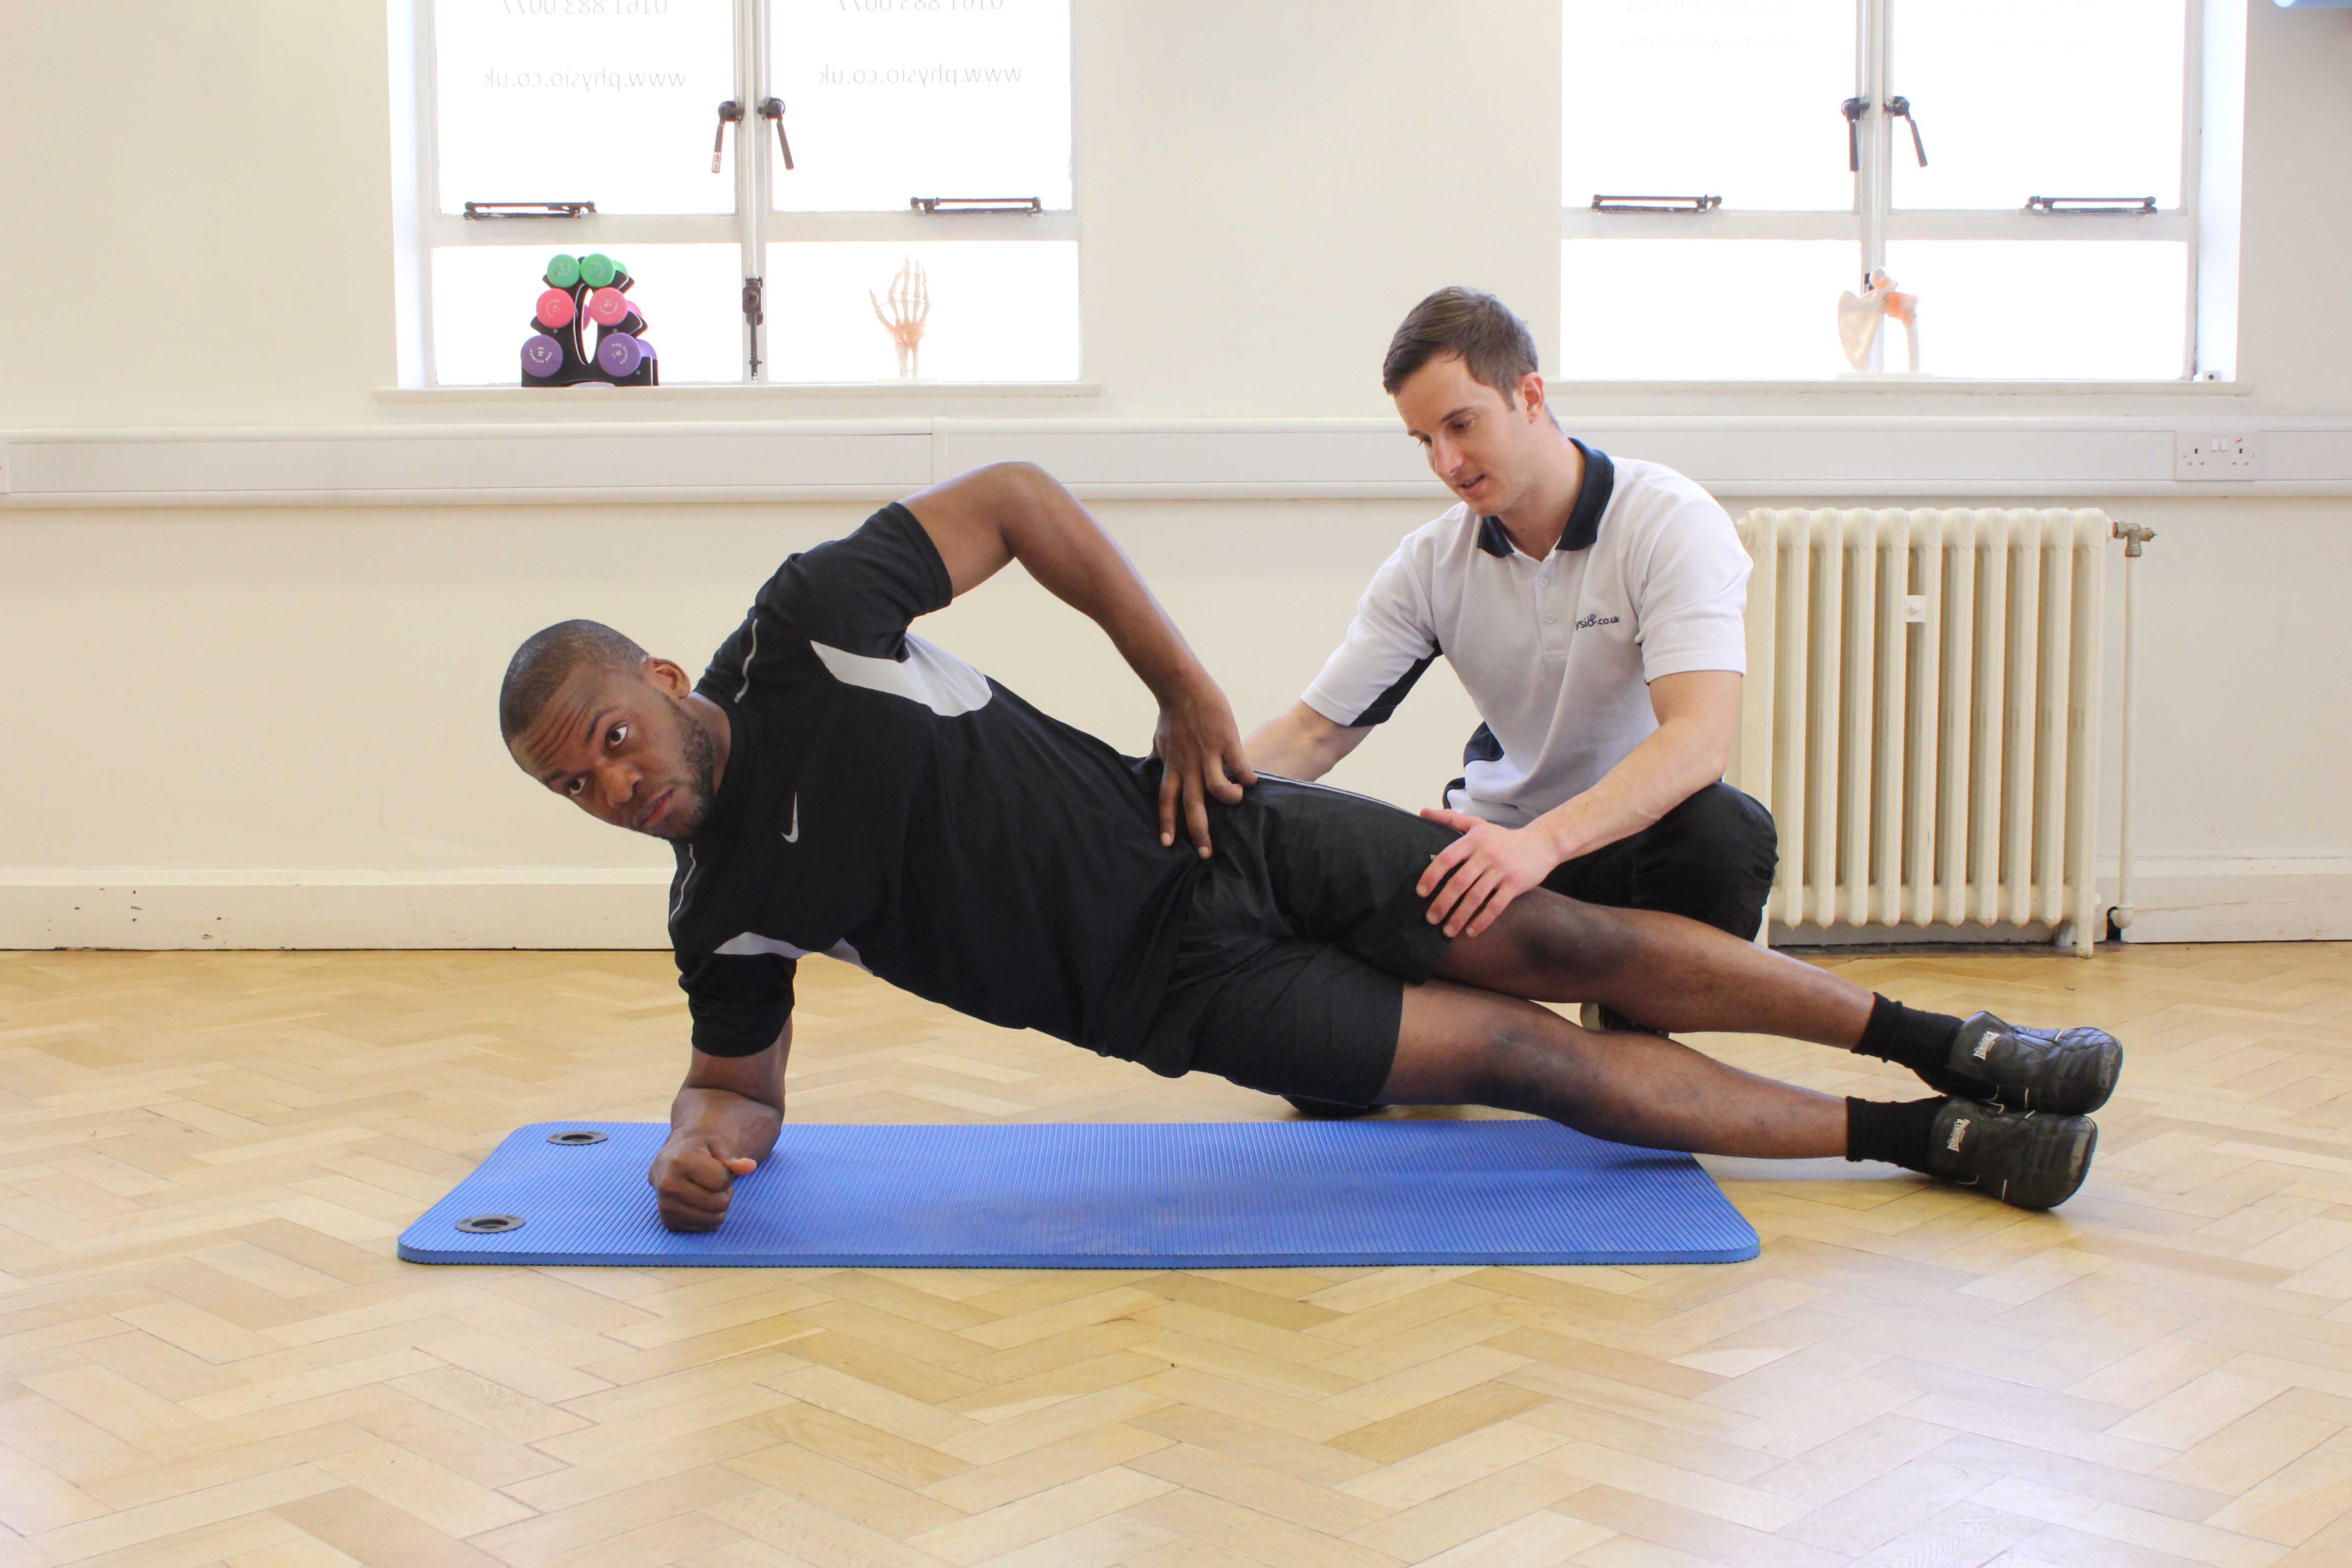 Strengthening exercises for the hip and pelvic muscles, supervised by MSK therapist